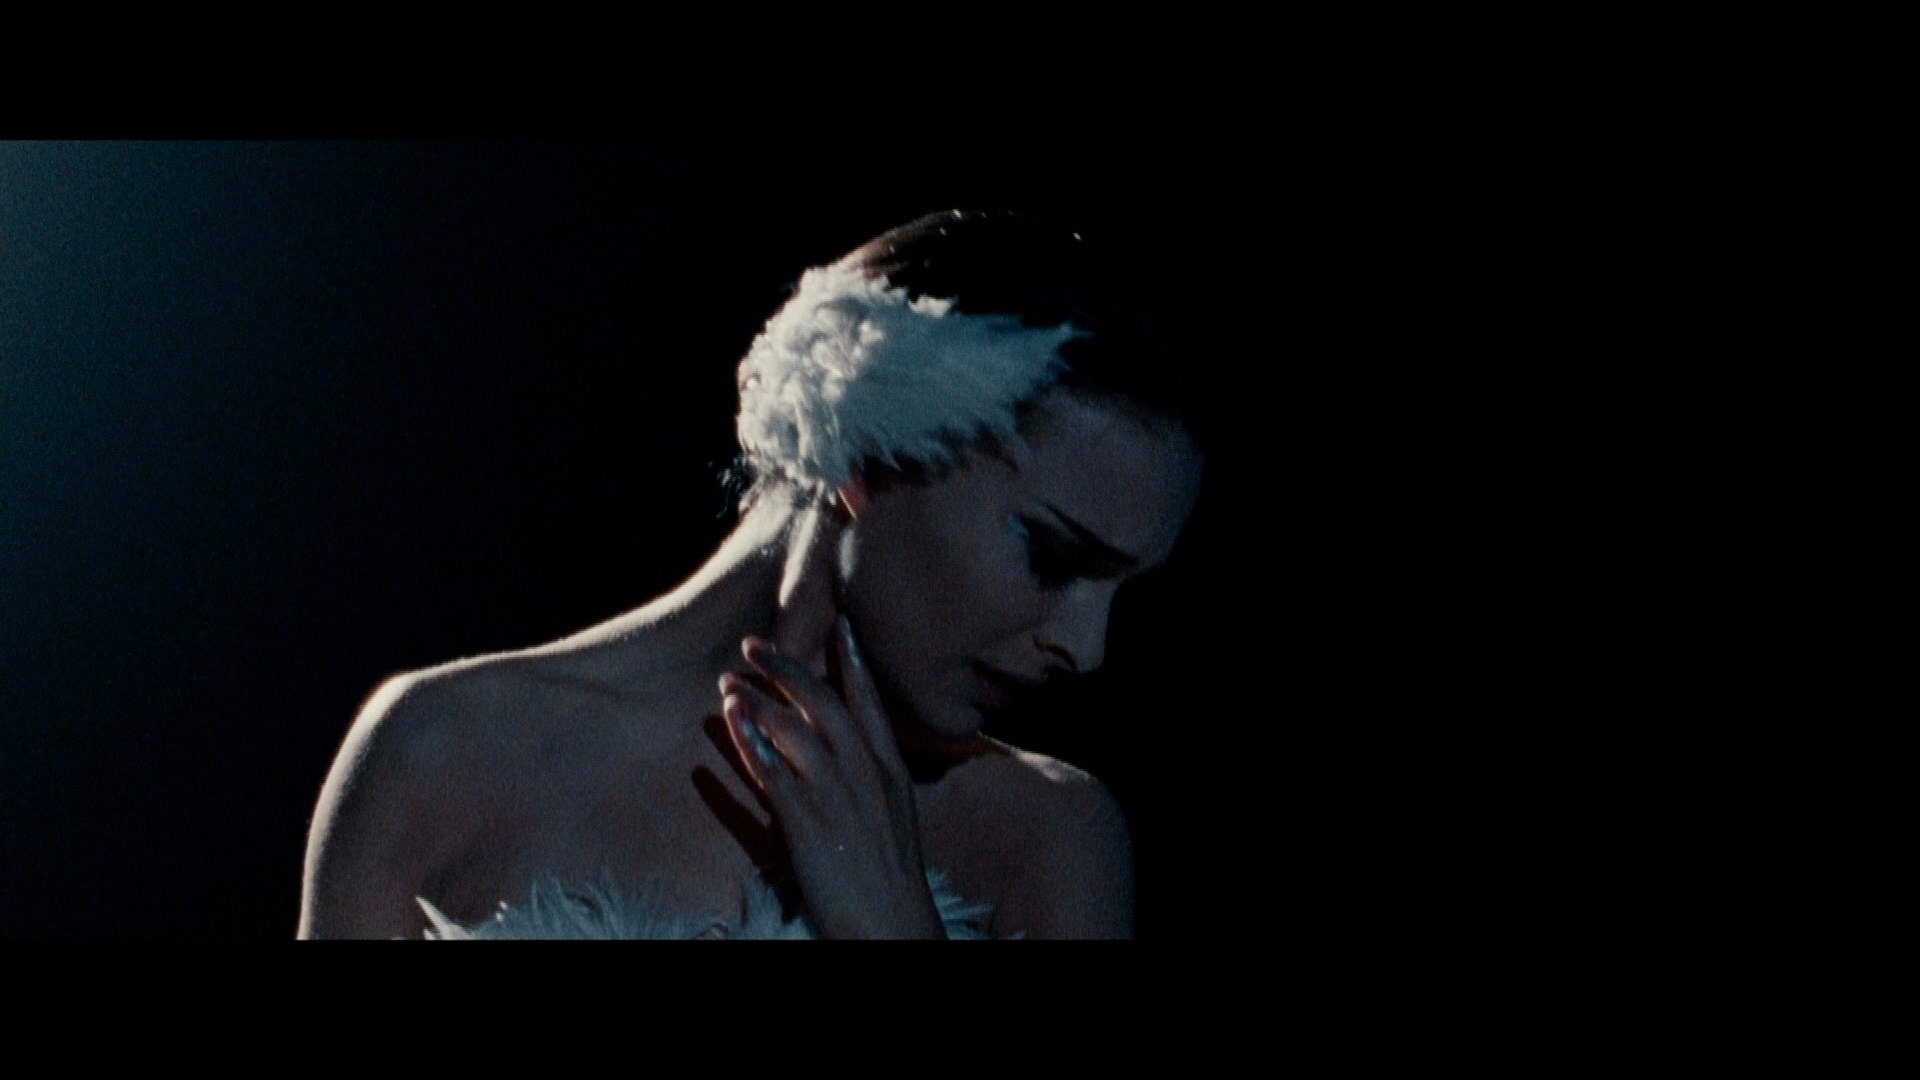 Camera as Psychosis: The Cinematography of Black Swan « I Like Things That Look Like Mistakes